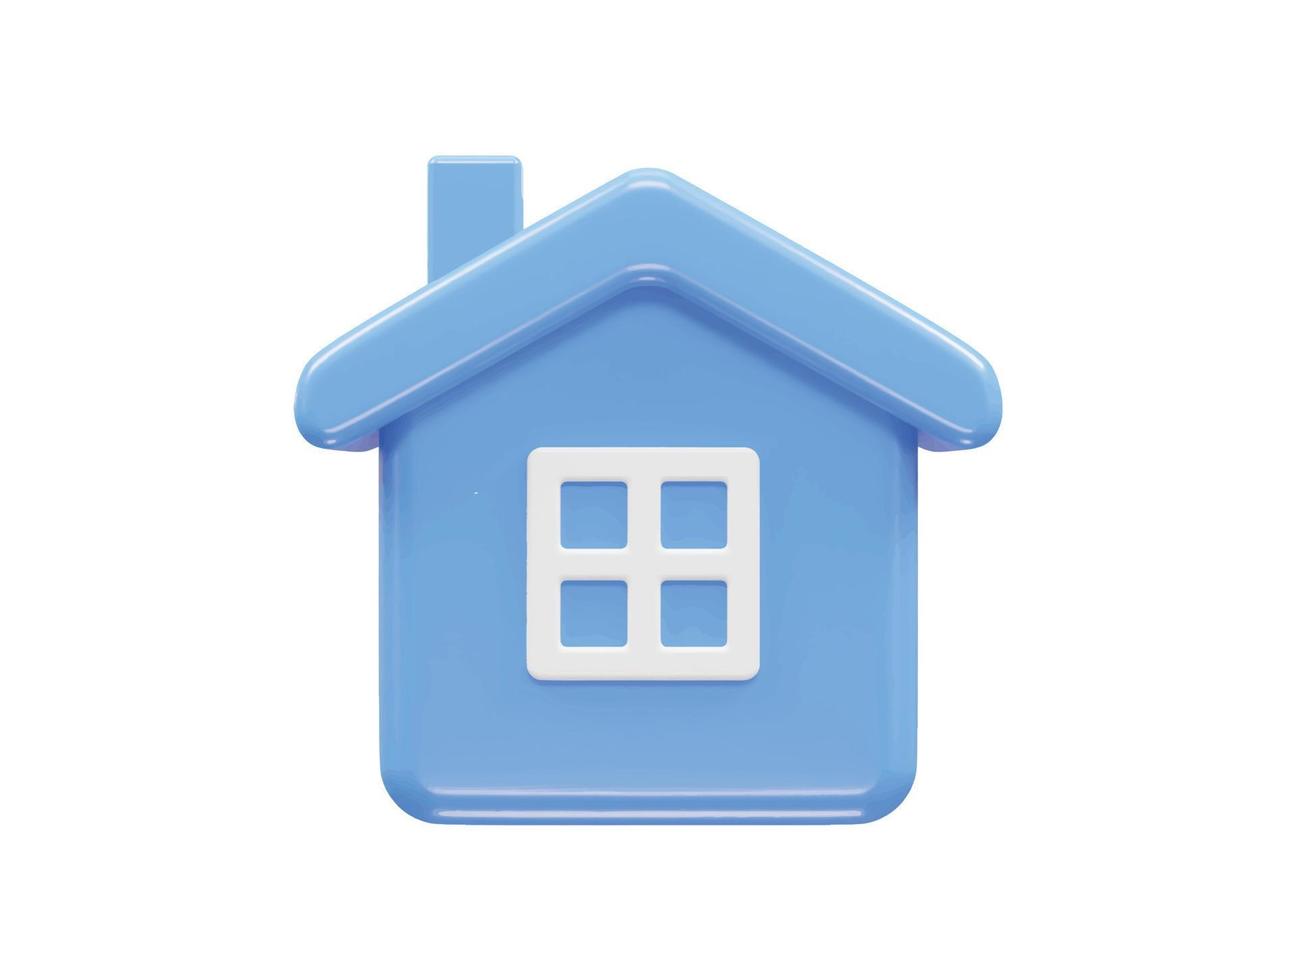 Home icon rendering 3d vector illustration